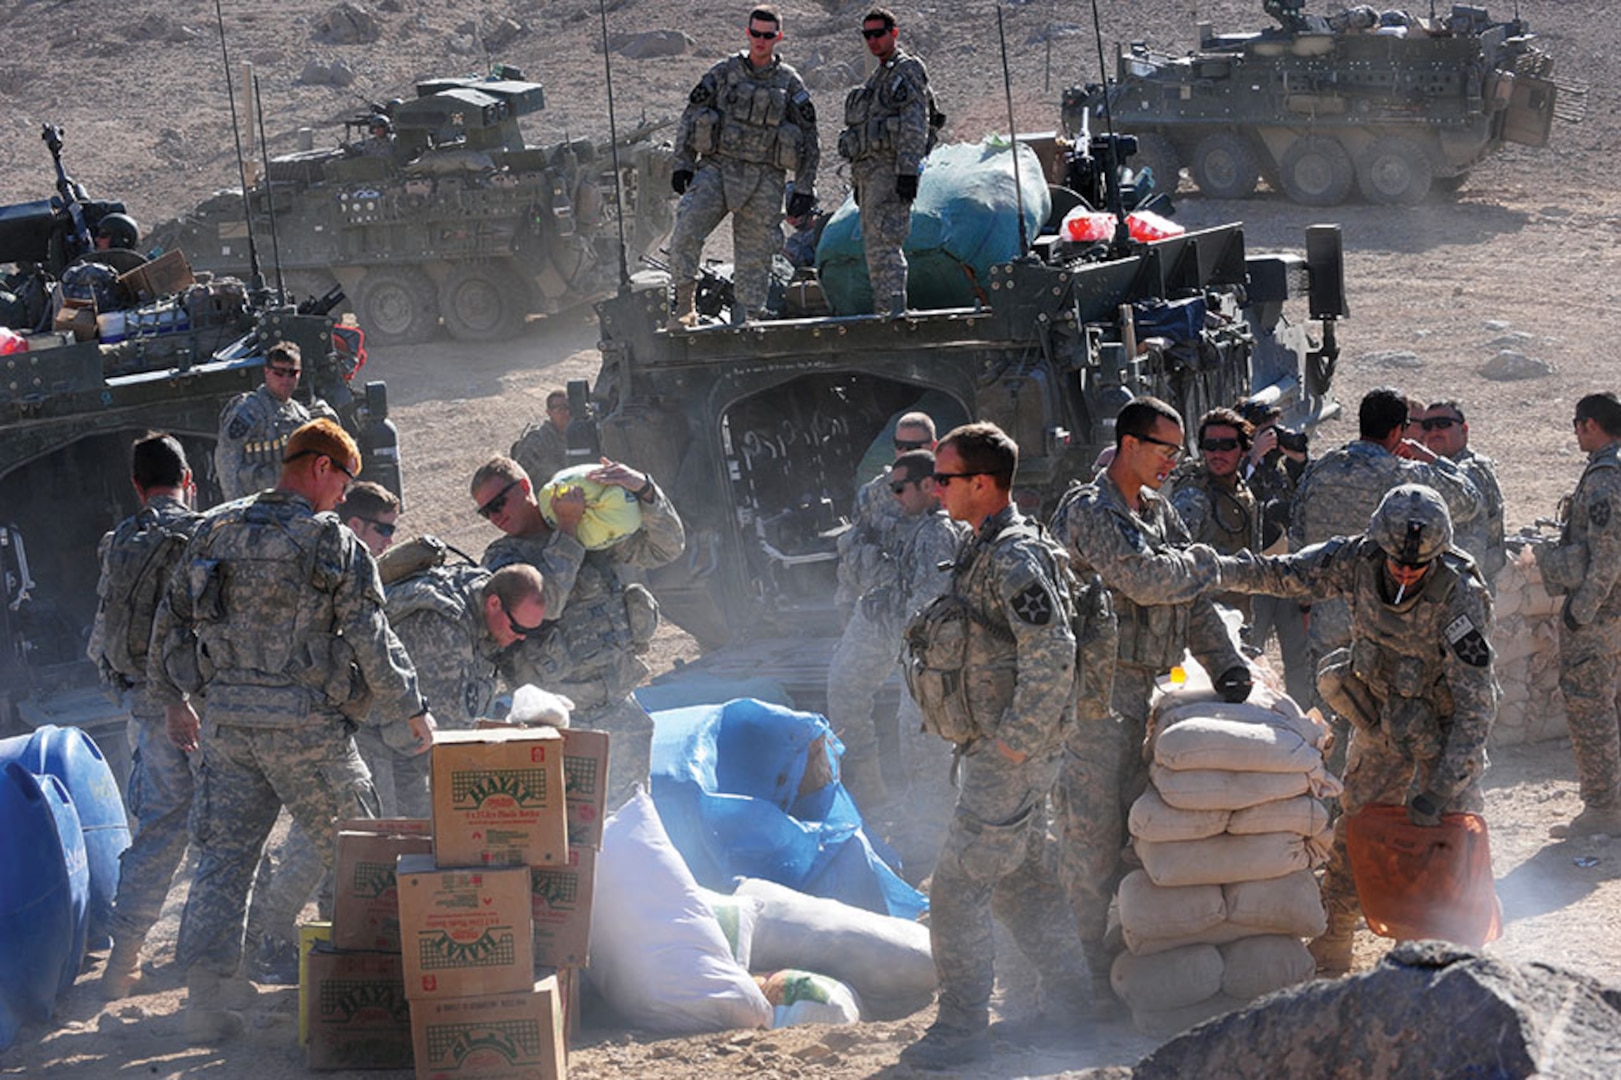 U.S. Soldiers transport and unpack humanitarian aid to an Afghani town.